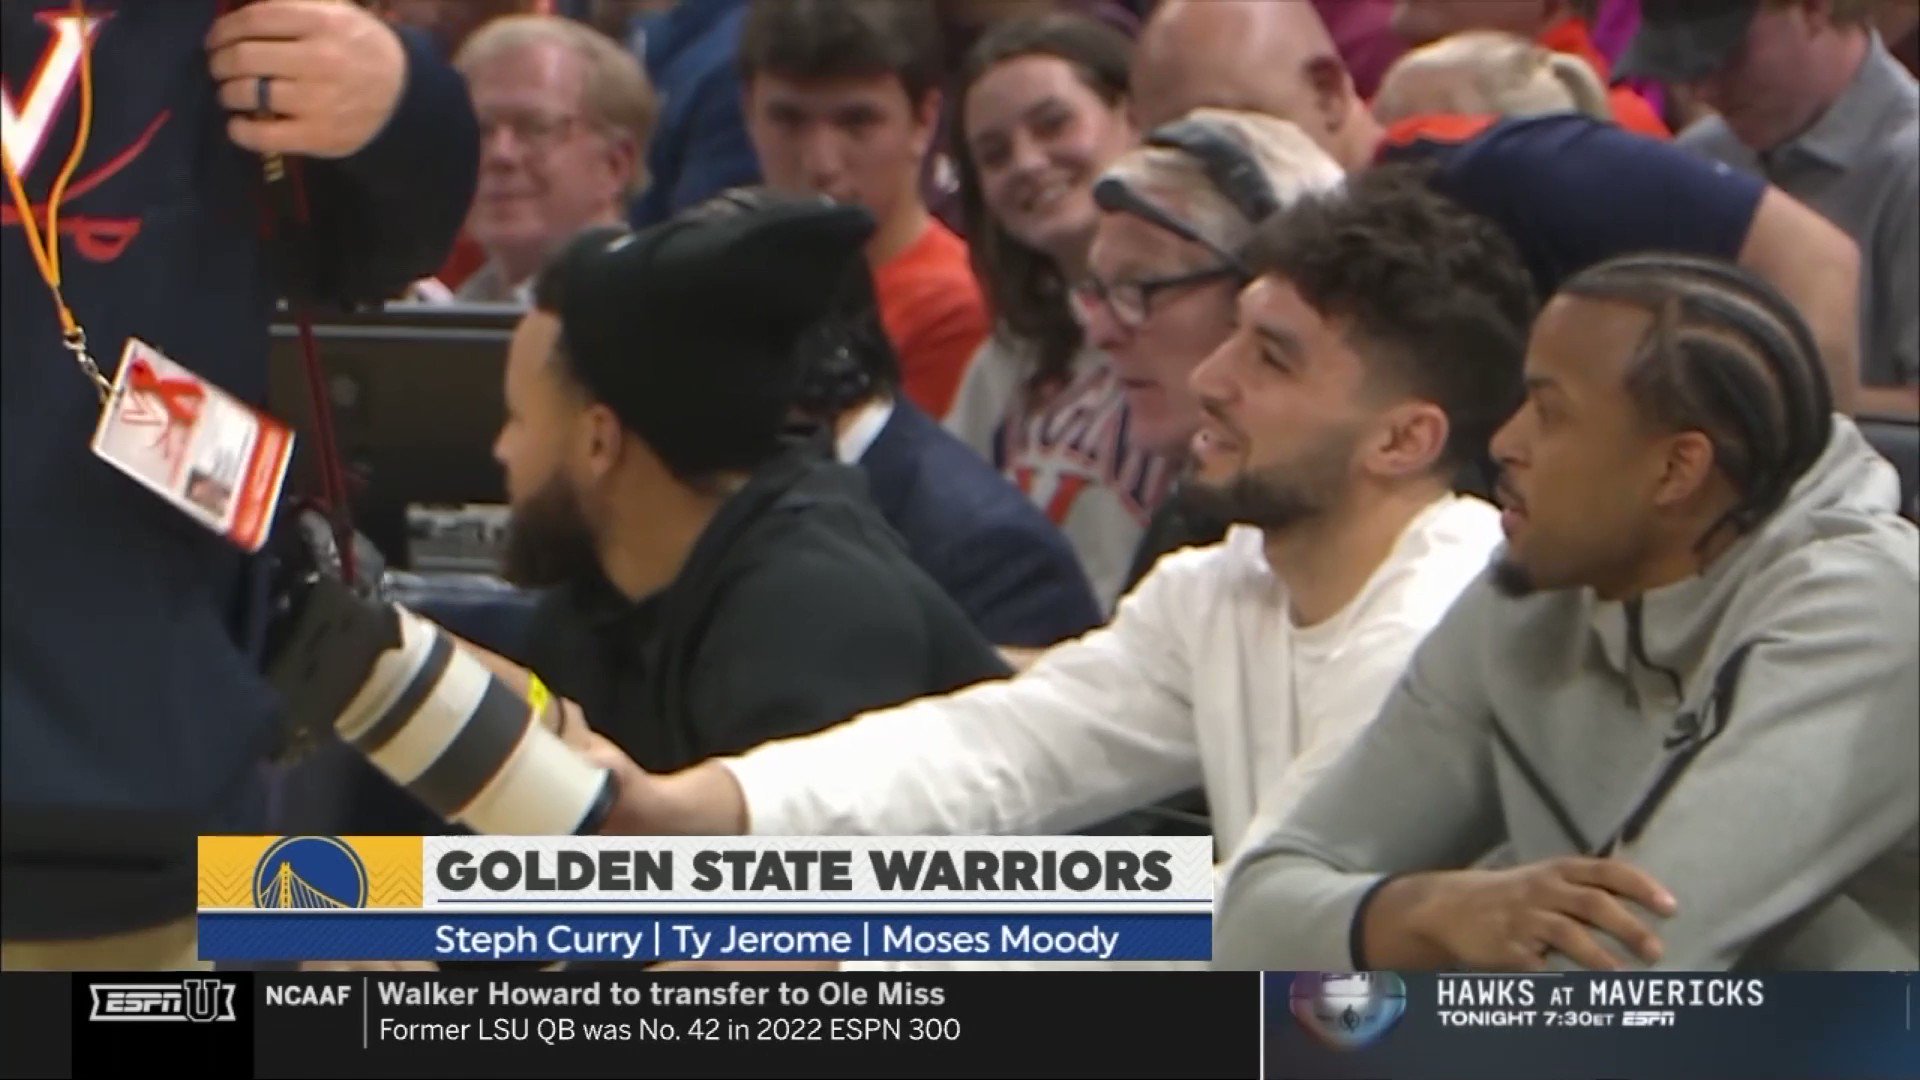 Warriors' Steph Curry and Ty Jerome approve of dunk by UVA's Beekman